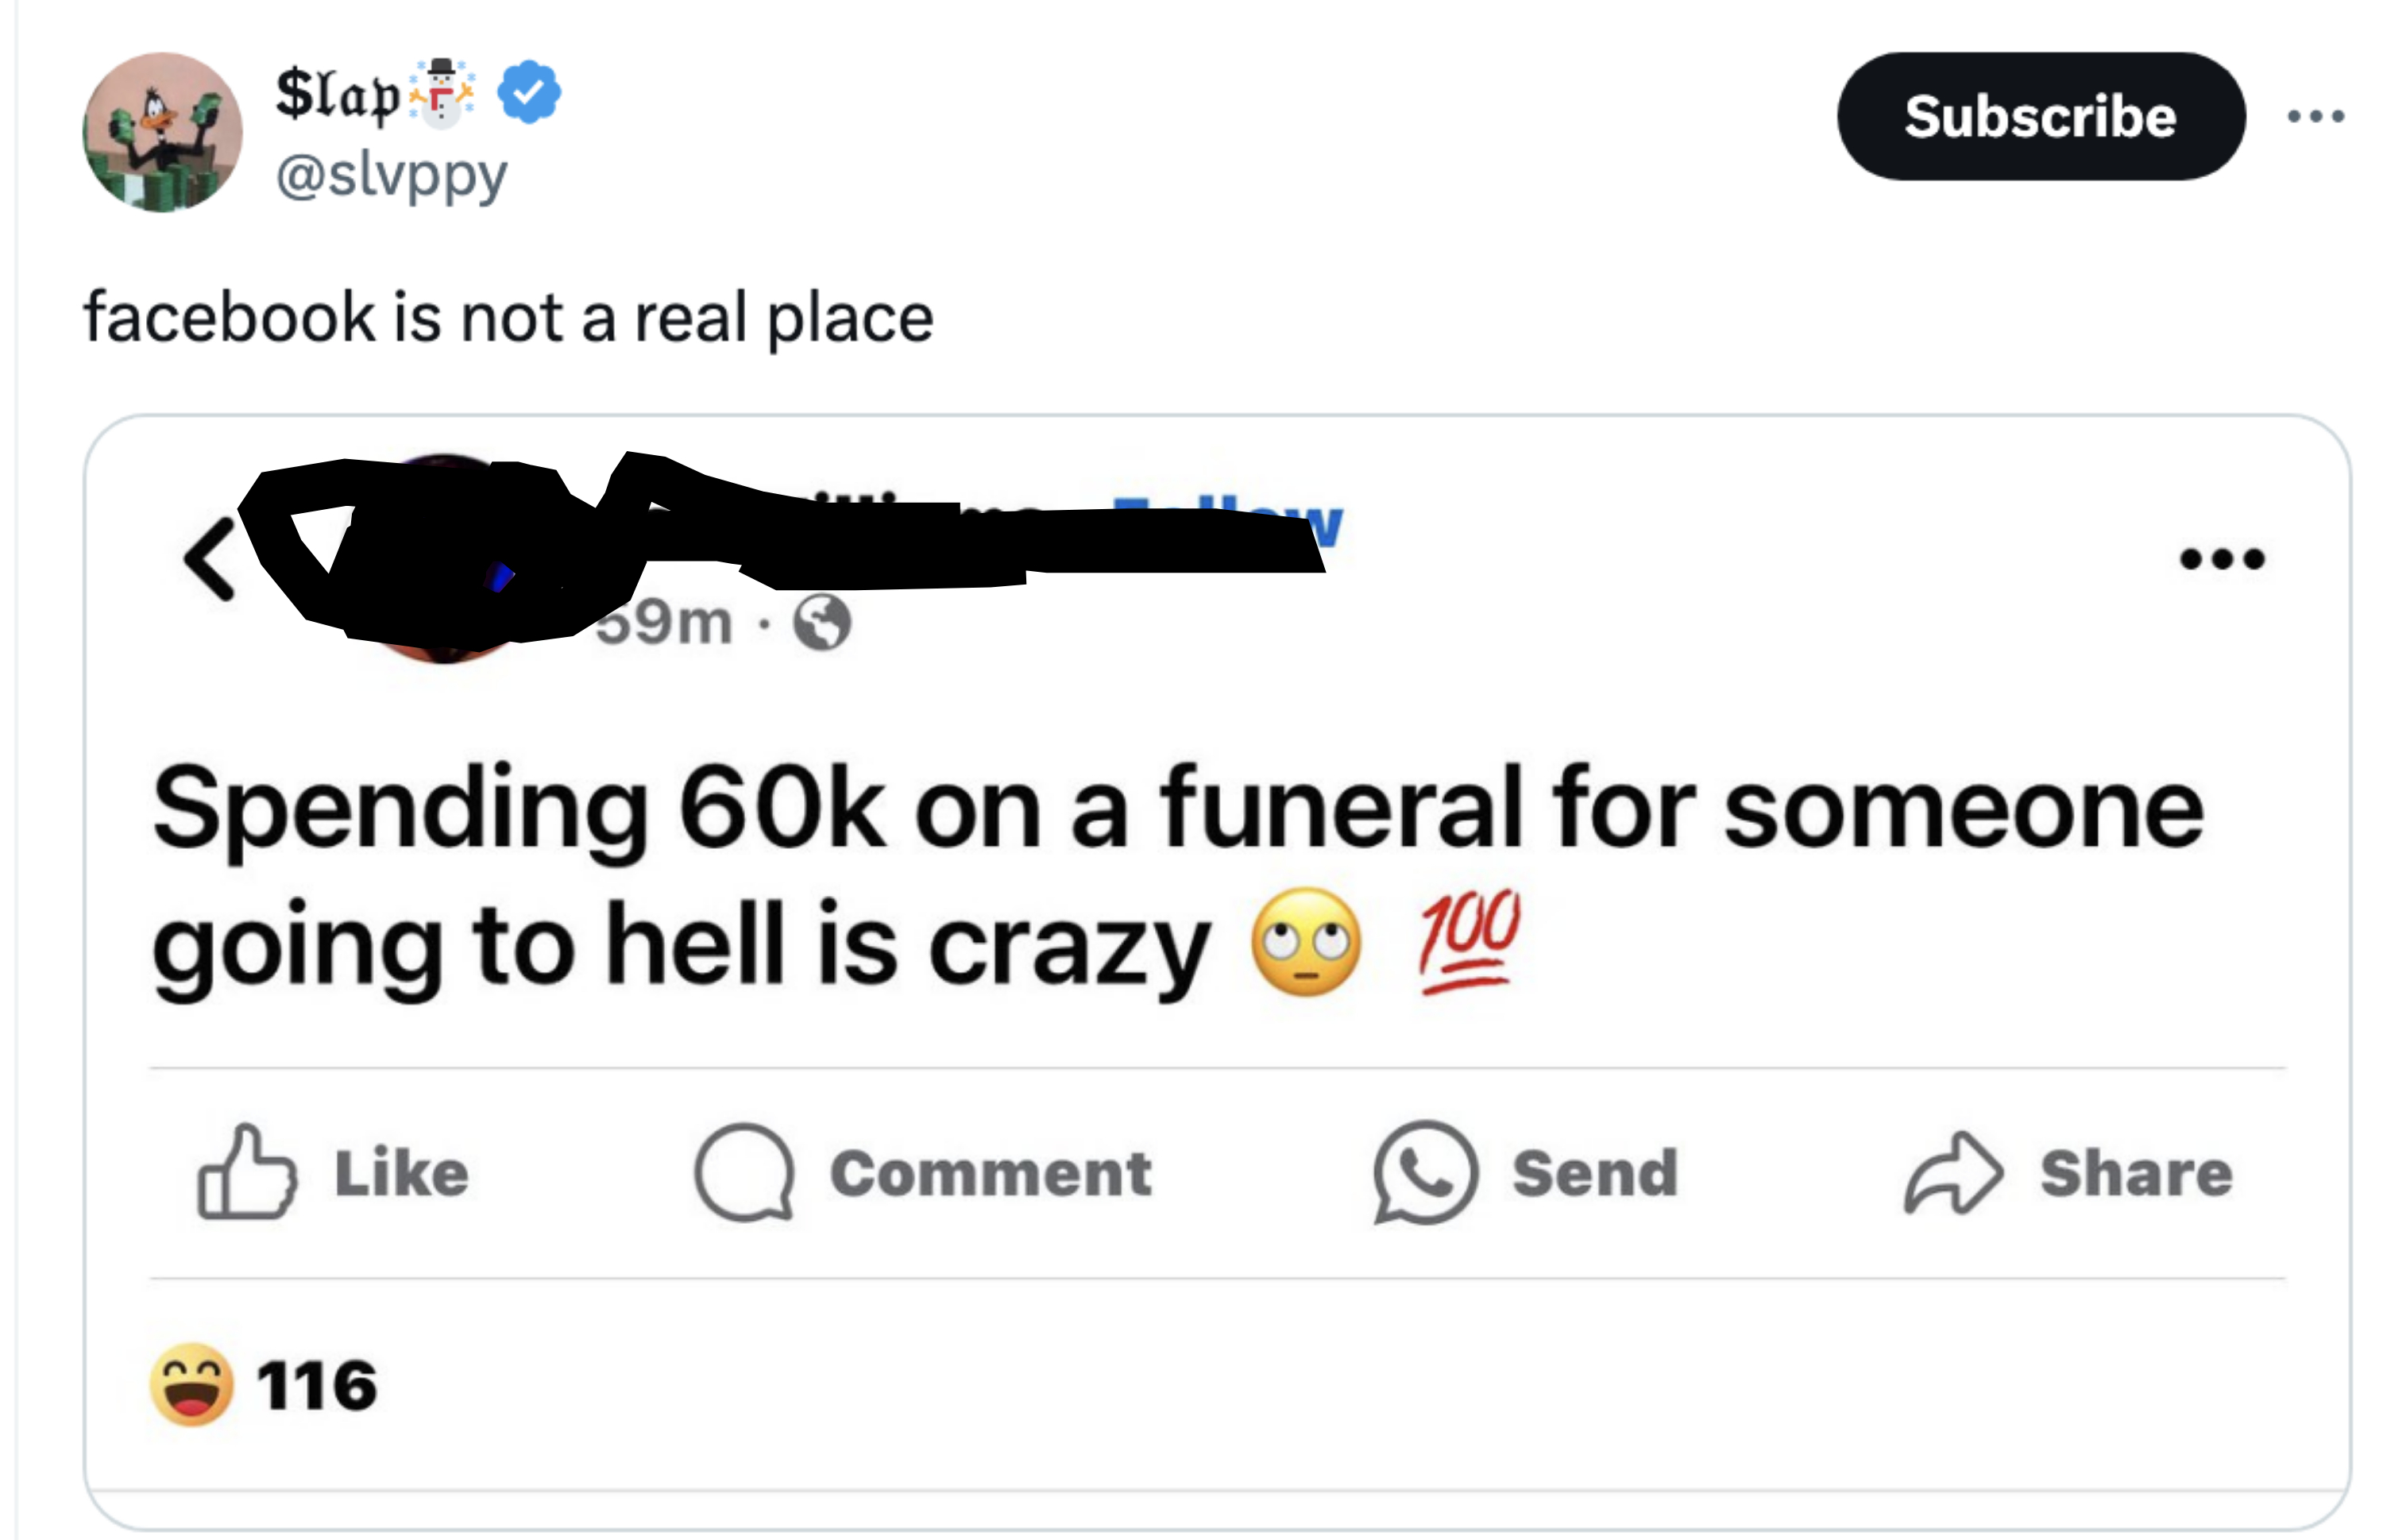 Social media screenshot: User expresses shock at high funeral costs for a presumably bad person